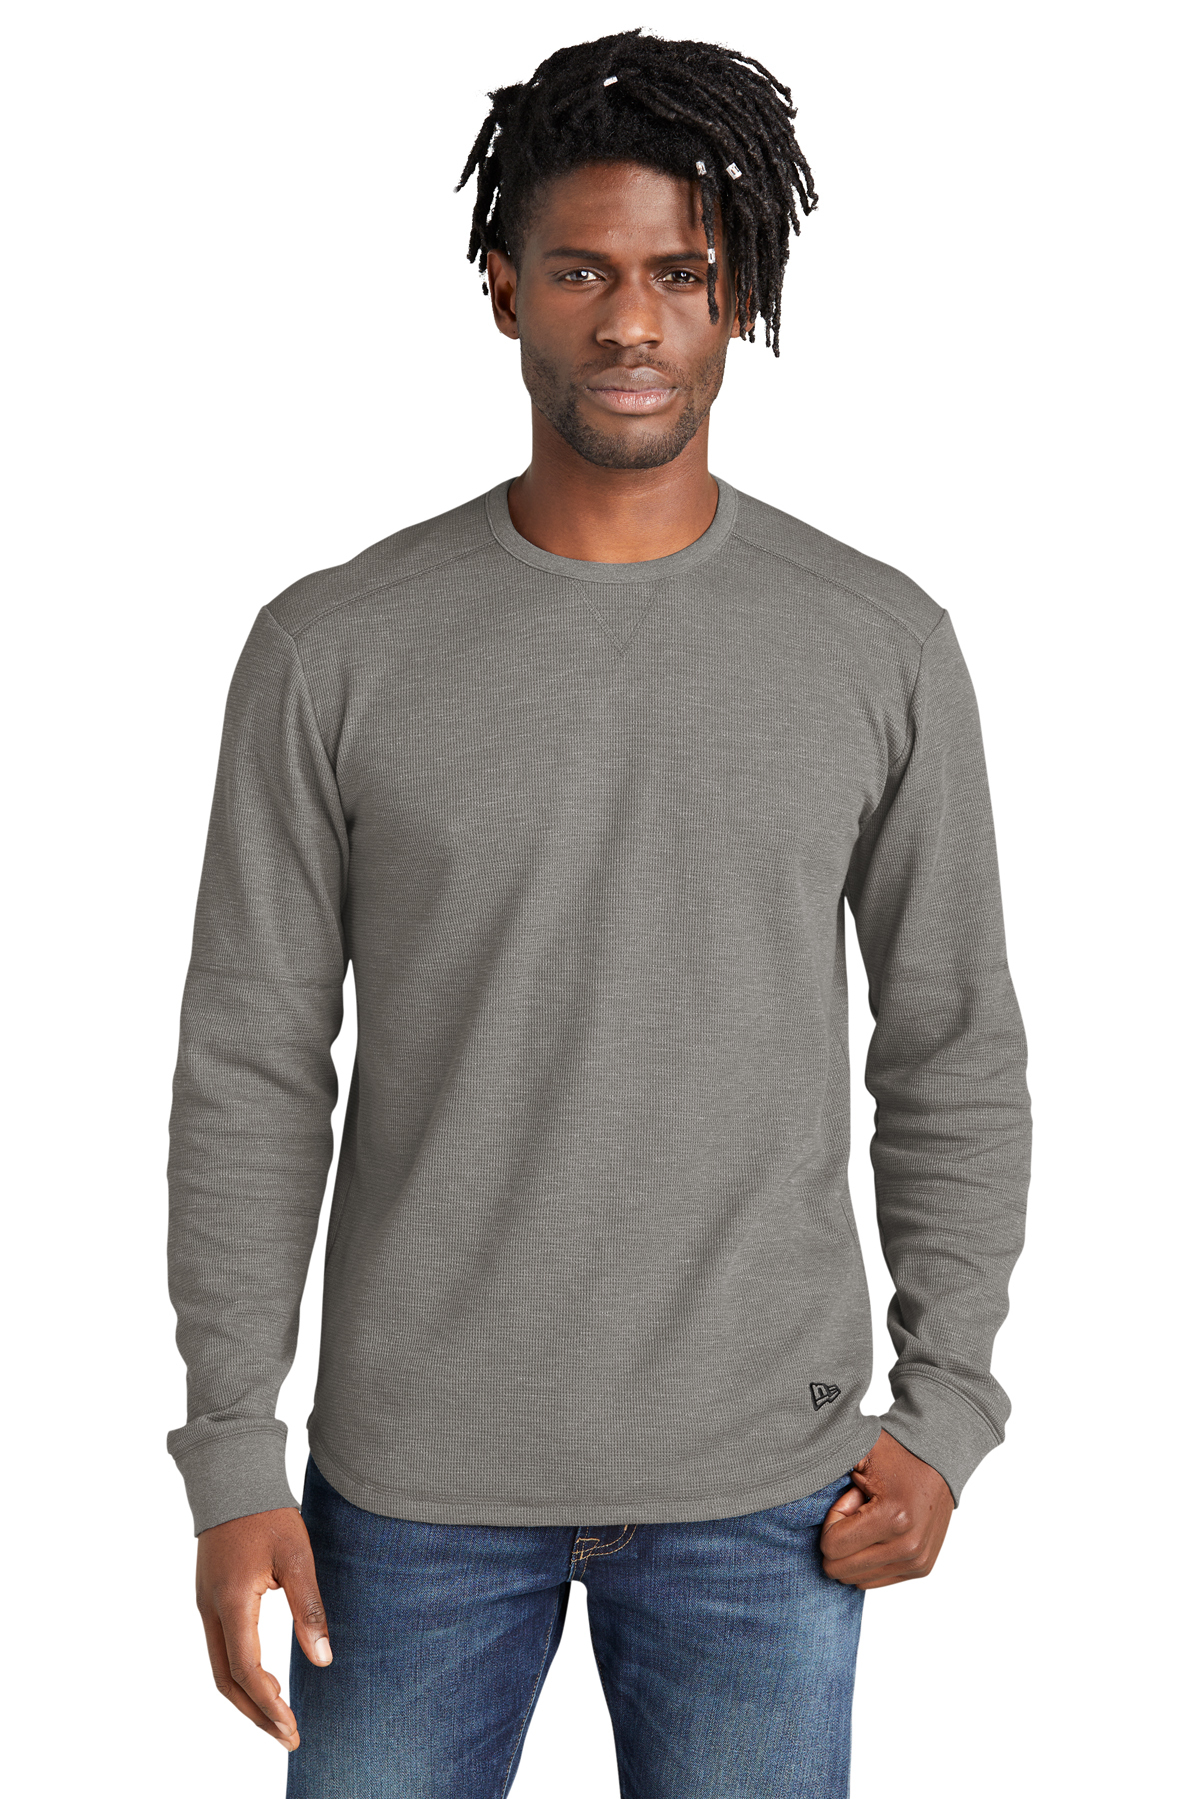 New Era Thermal Long Sleeve, Product